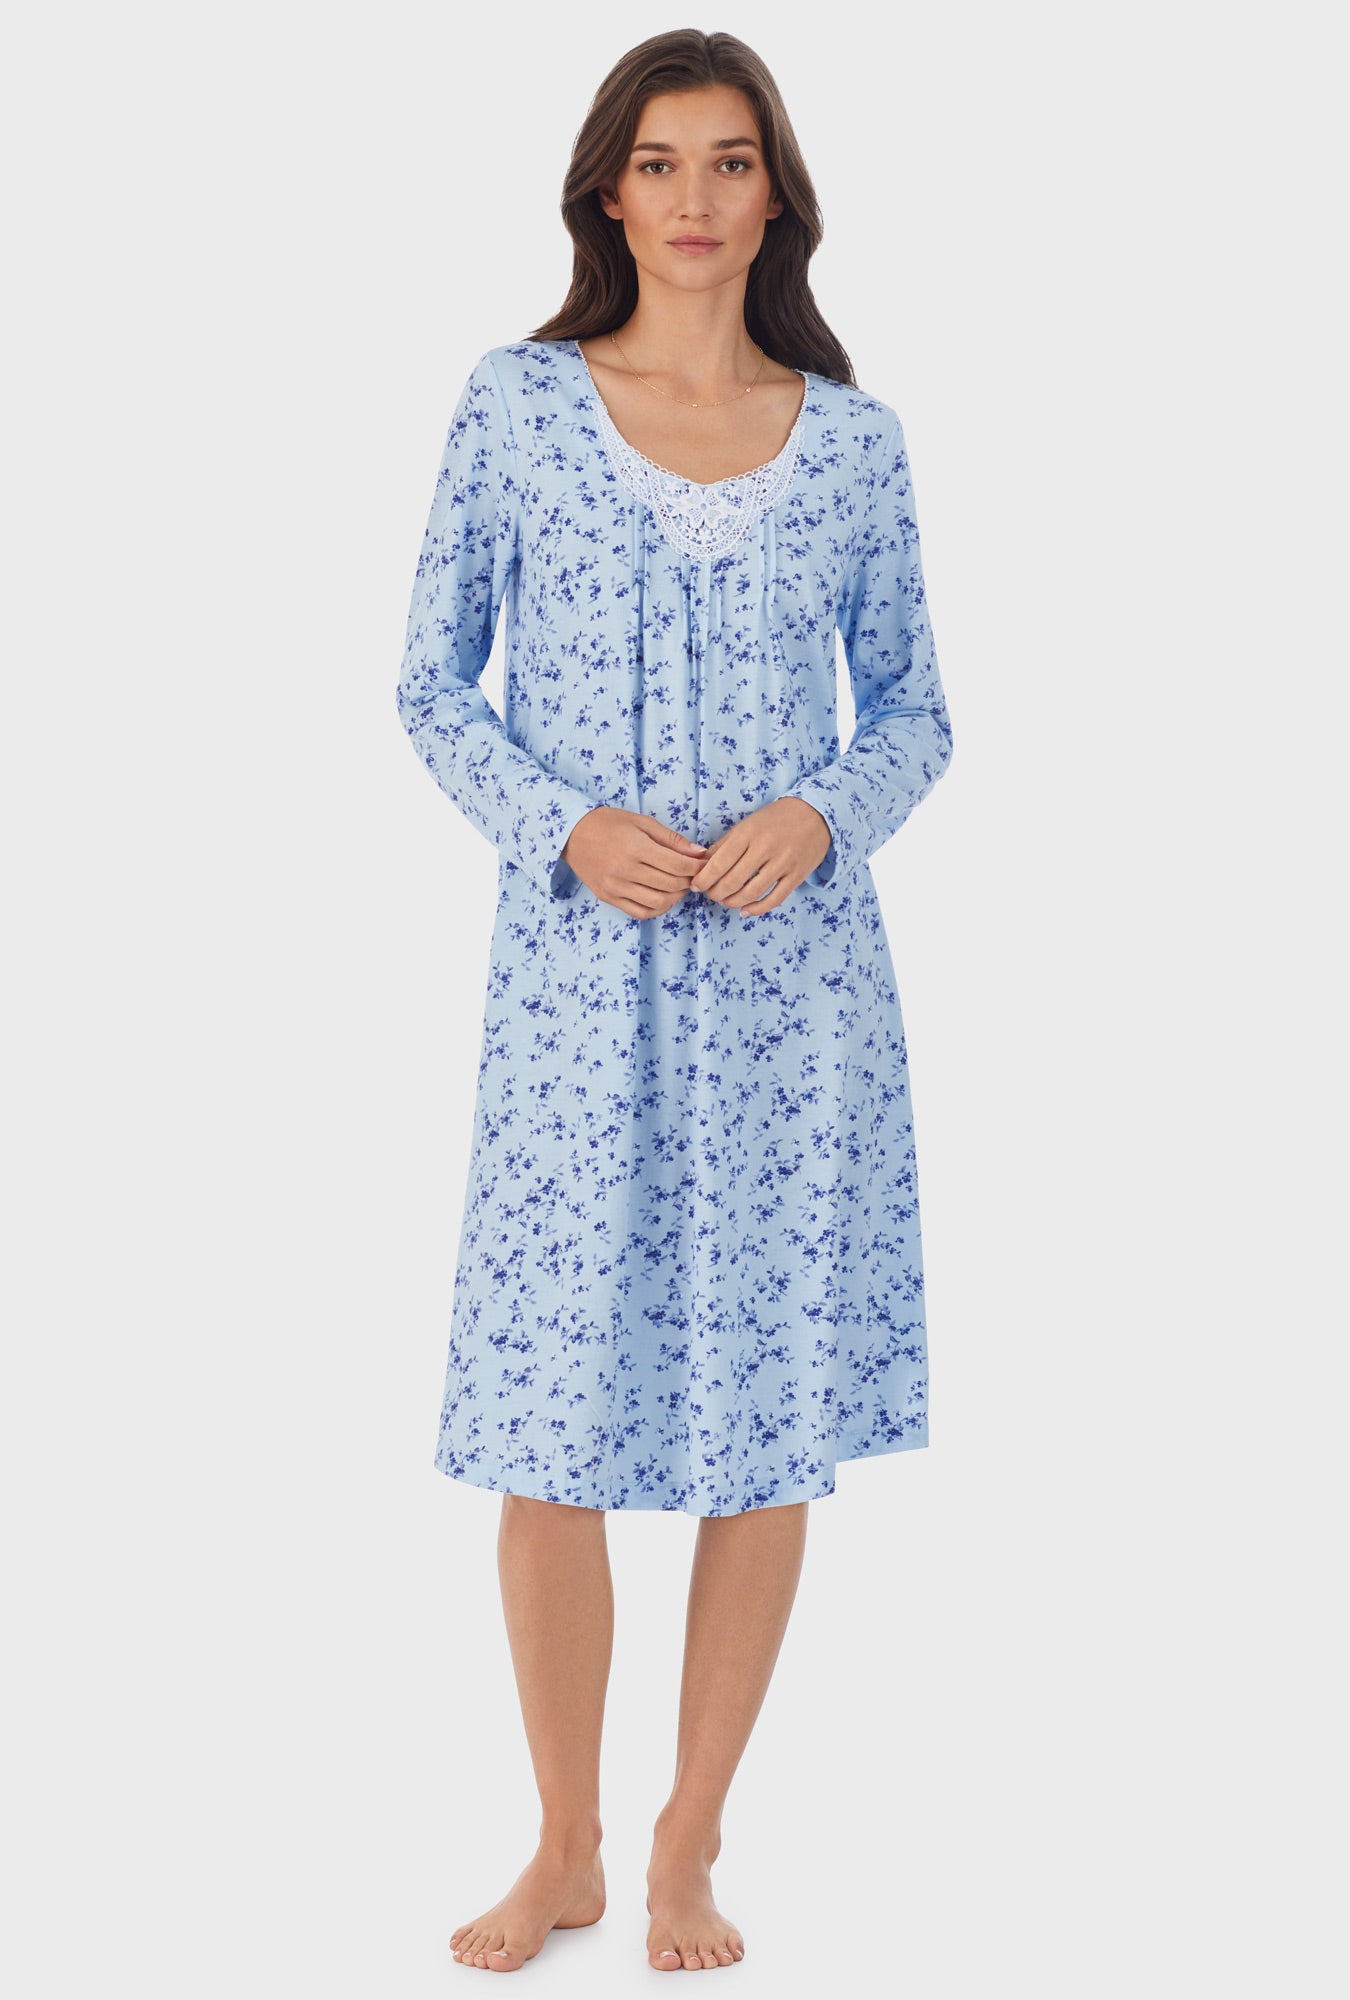 A lady wearing blue long sleeve cotton waltz nightgown with winter floral print.